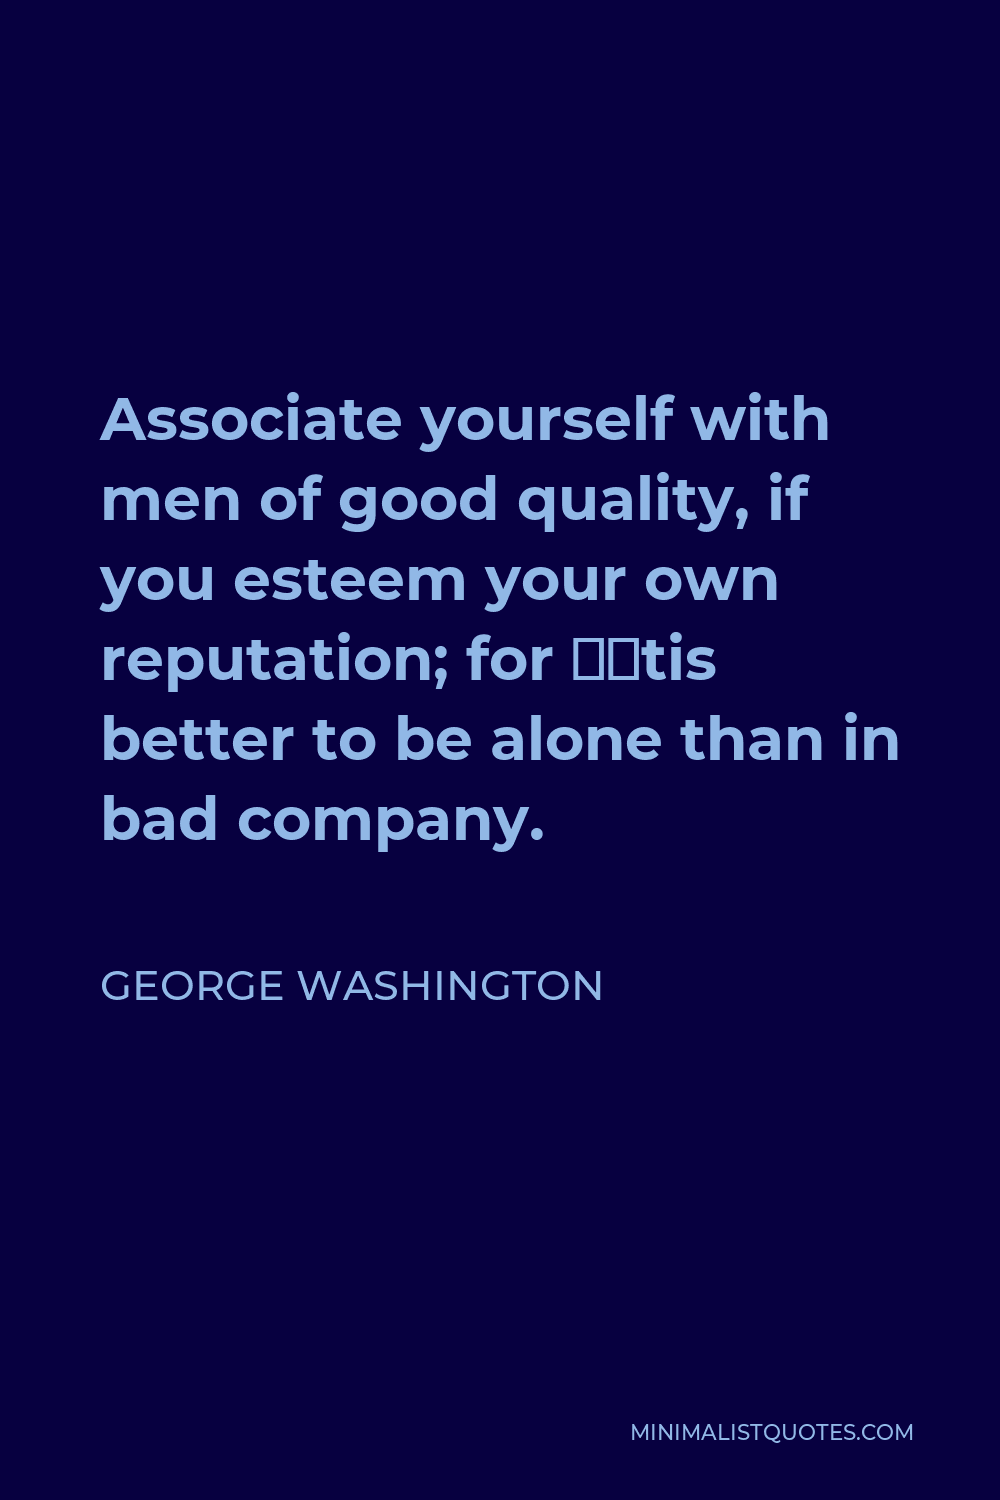 George Washington Quote - Associate yourself with men of good quality, if you esteem your own reputation; for ‘tis better to be alone than in bad company.